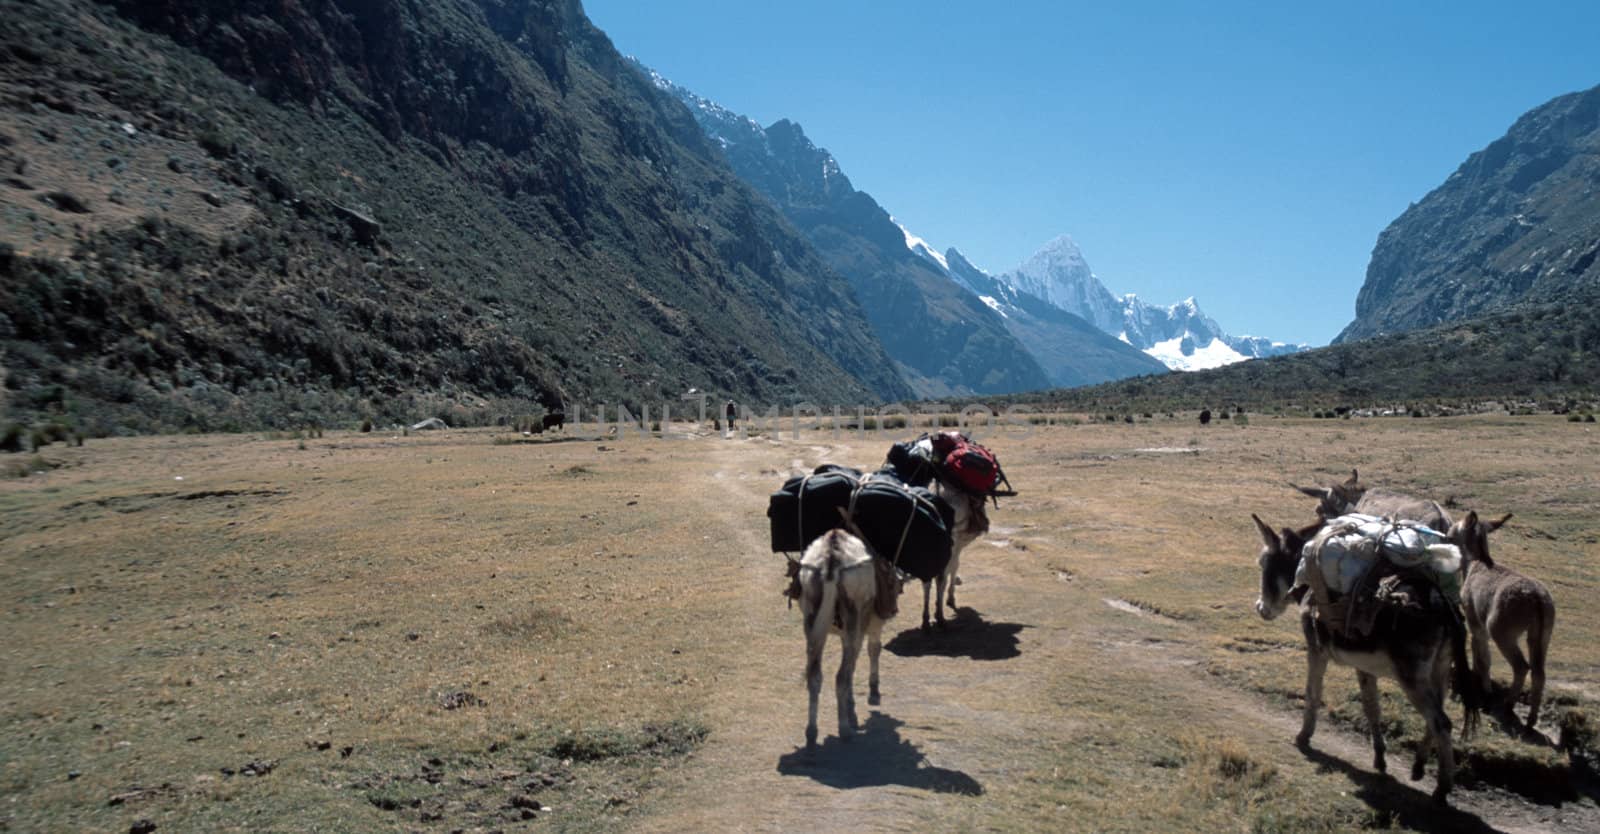 Pack donkeys carrying equipment in valley in Peru surrounded by Andes Mountains